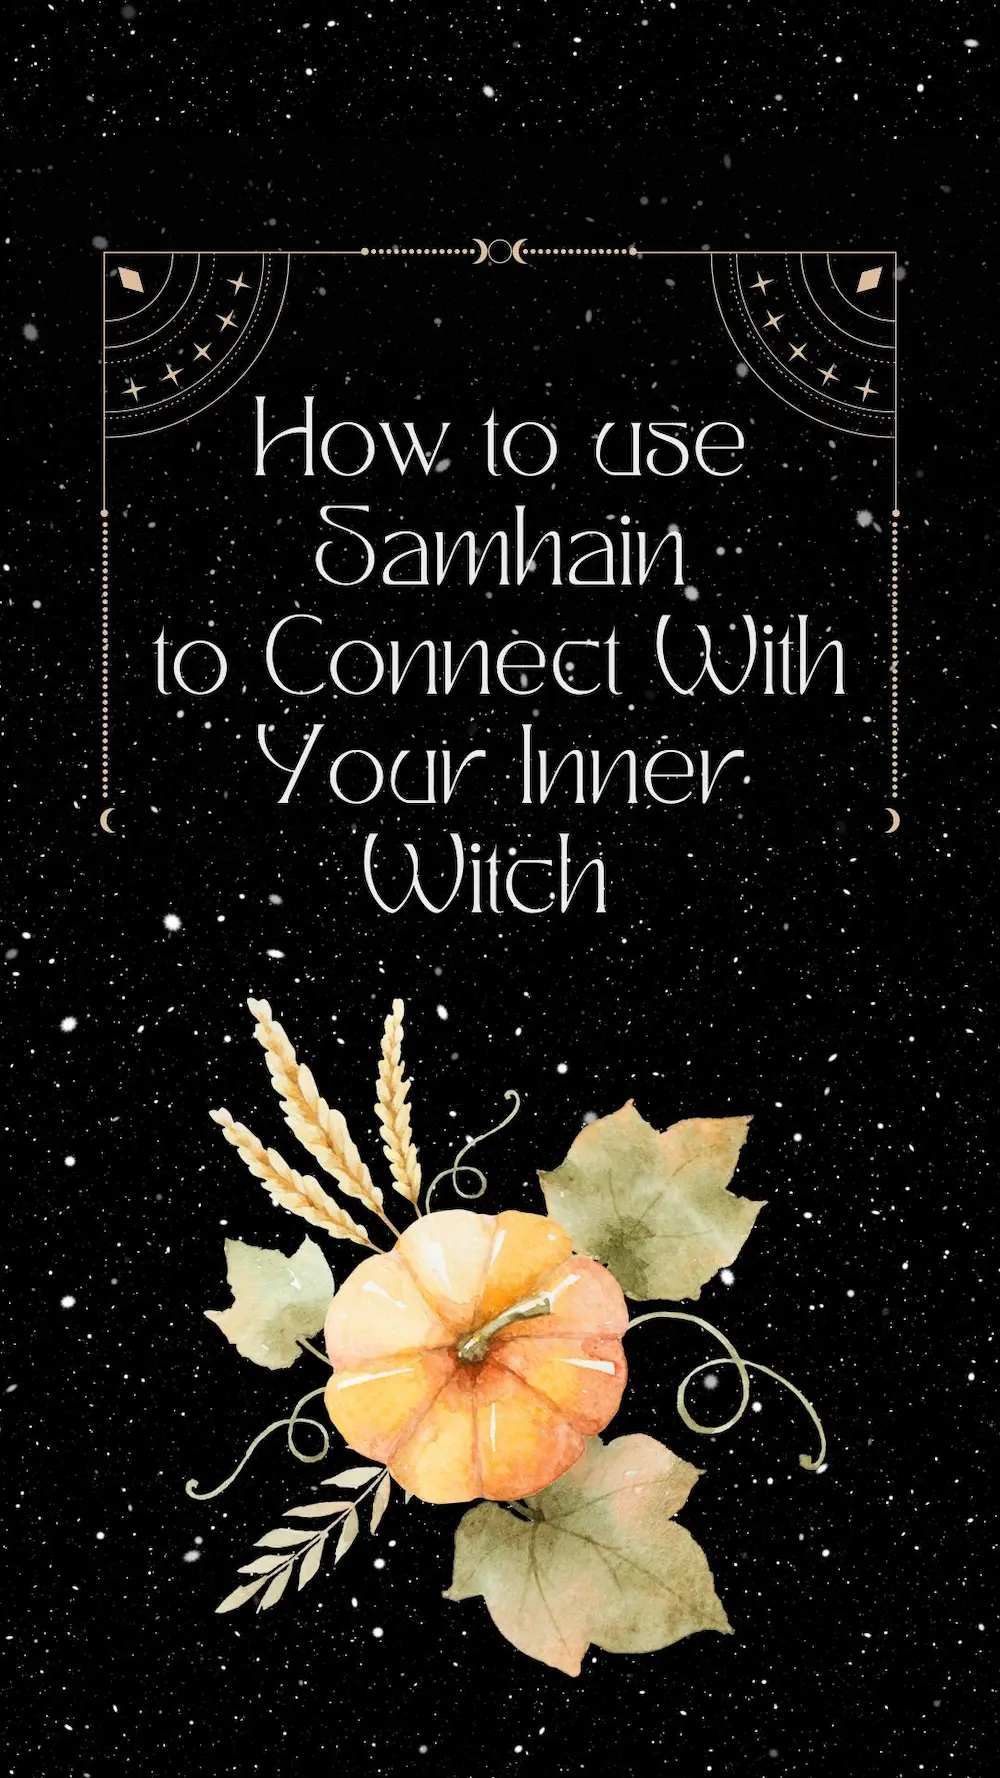 how to connect with inner witch this samhain